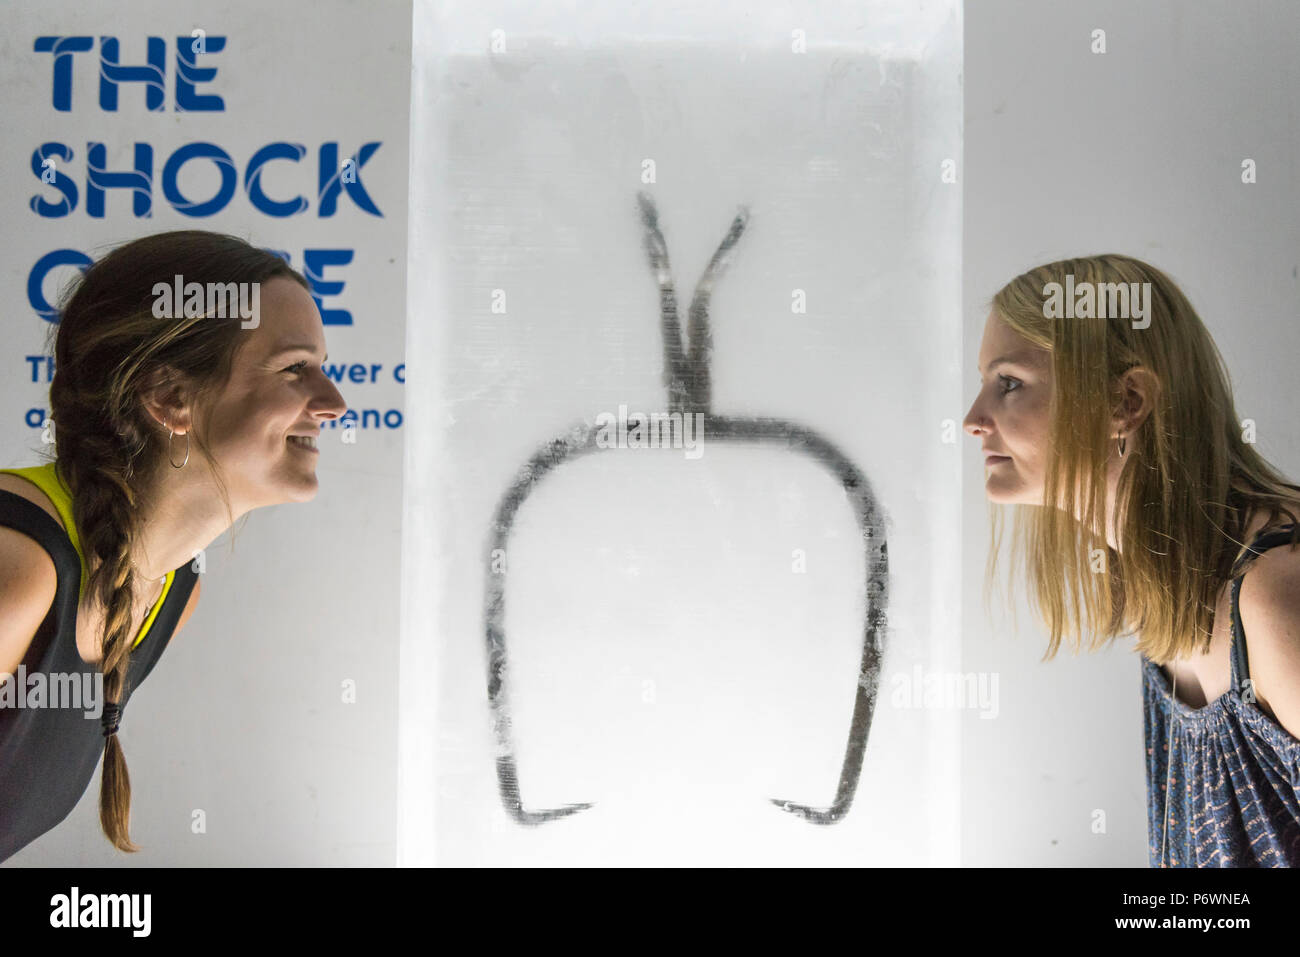 London, UK.  3 July 2018. Staff members view an Ice Hook (or Ice Dog) , circa 1910, presented encased in a block of ice, at a preview of 'SCOOP: A Wonderful Ice Cream World', the first official exhibition of the British Museum of Food.  The exhibition presents items from the Robin and Caroline Weir Collection and explores the science and appeal of ice cream going back 400 years.  The exhibition takes place at the Gasholders near Granary Square in Kings Cross and runs 3 July to 30 September 2018.. Credit: Stephen Chung / Alamy Live News Stock Photo